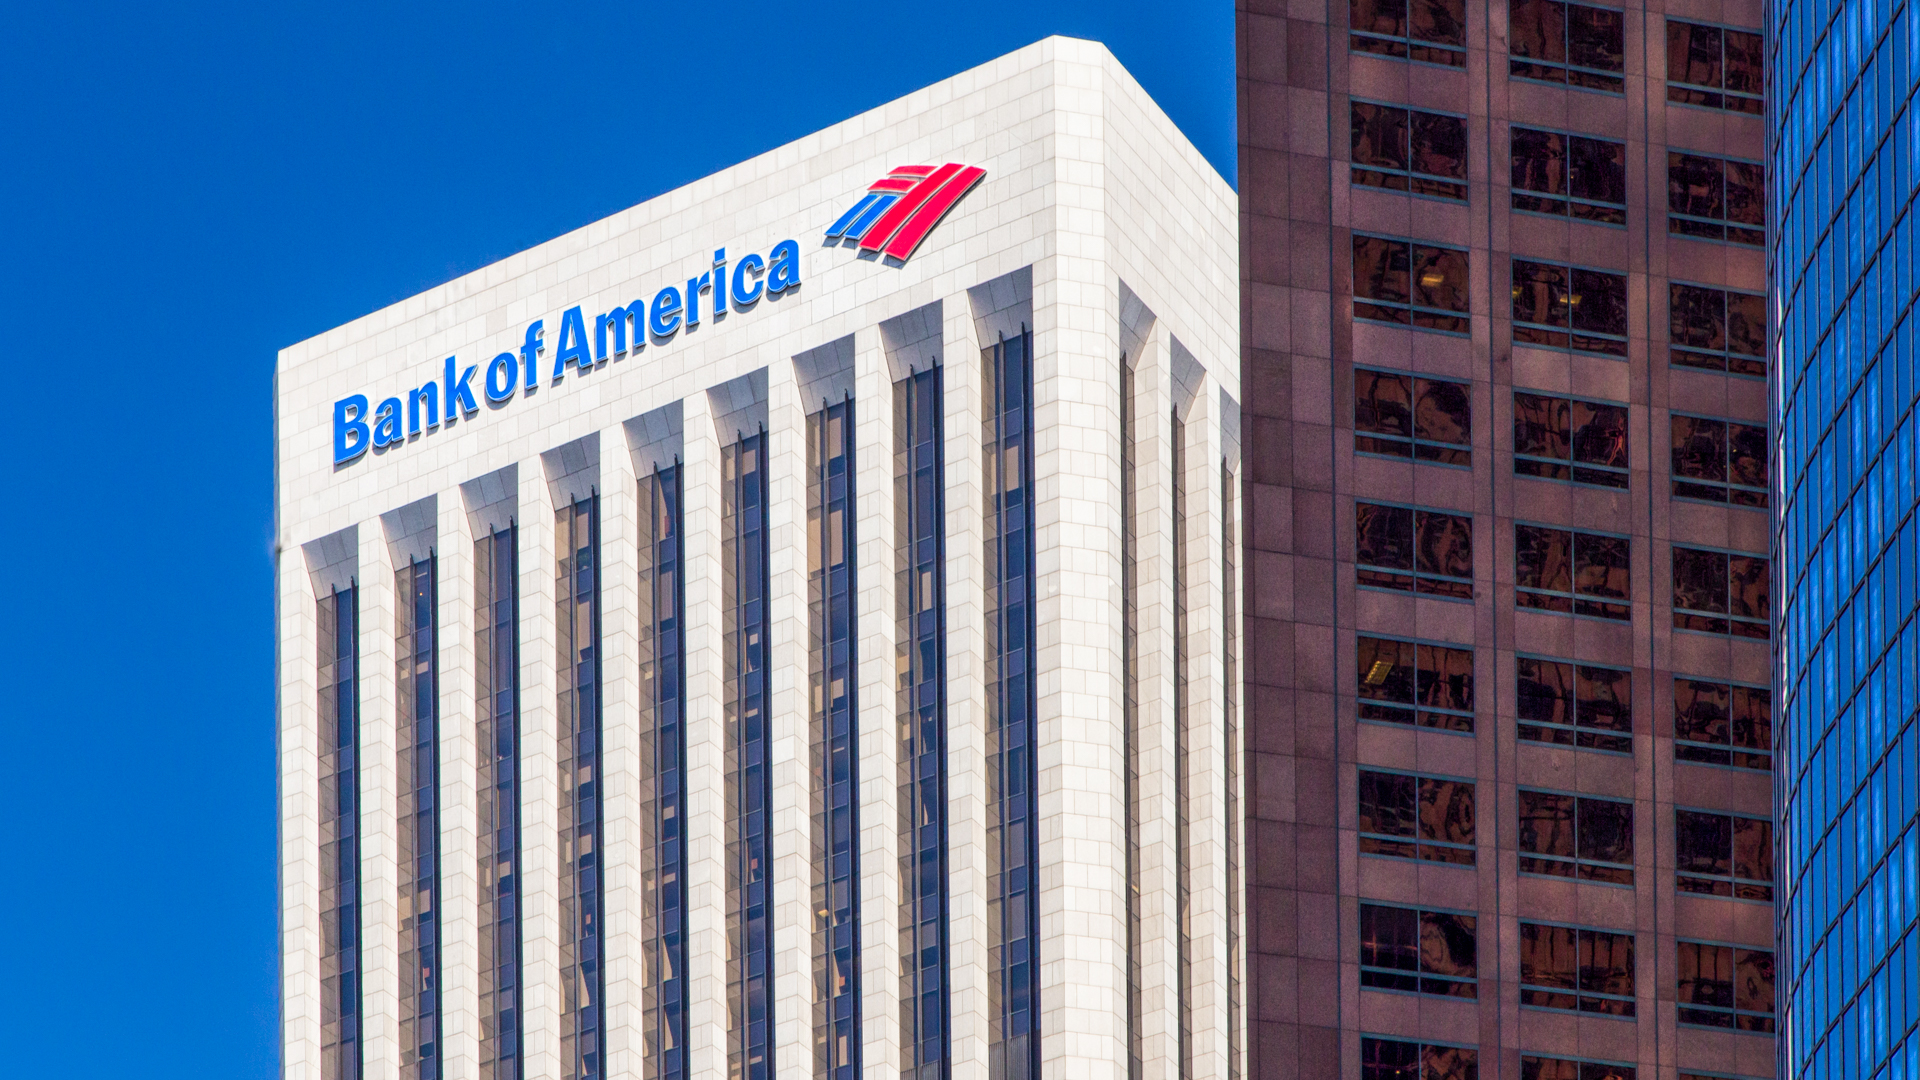 How to deposit check in Bank of America and Deposit Limits